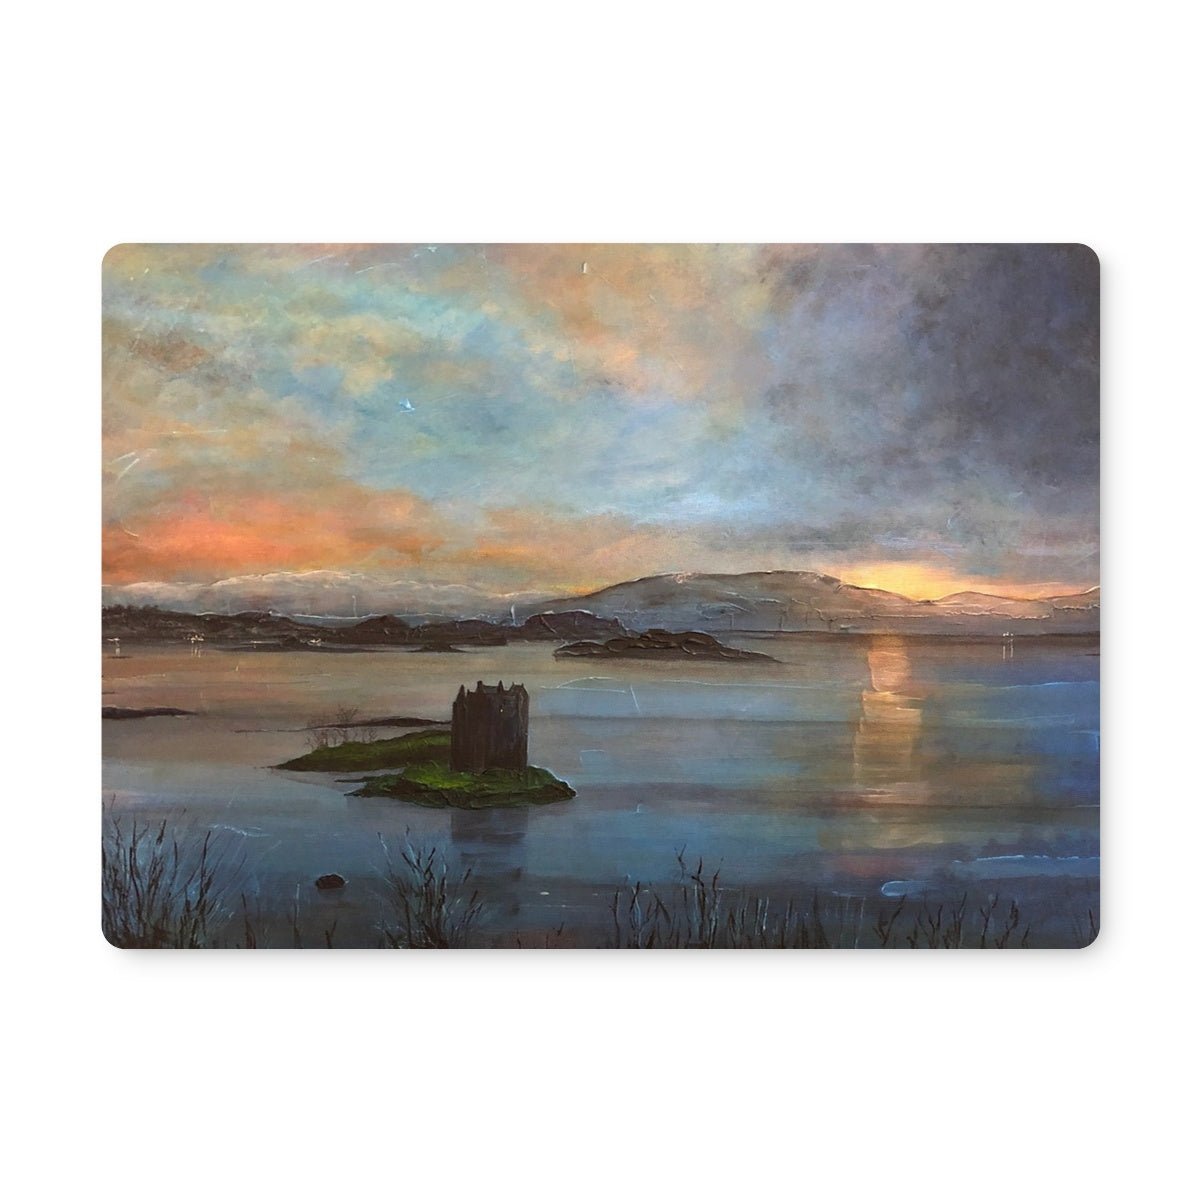 Castle Stalker Twilight Art Gifts Placemat-Placemats-Historic & Iconic Scotland Art Gallery-2 Placemats-Paintings, Prints, Homeware, Art Gifts From Scotland By Scottish Artist Kevin Hunter